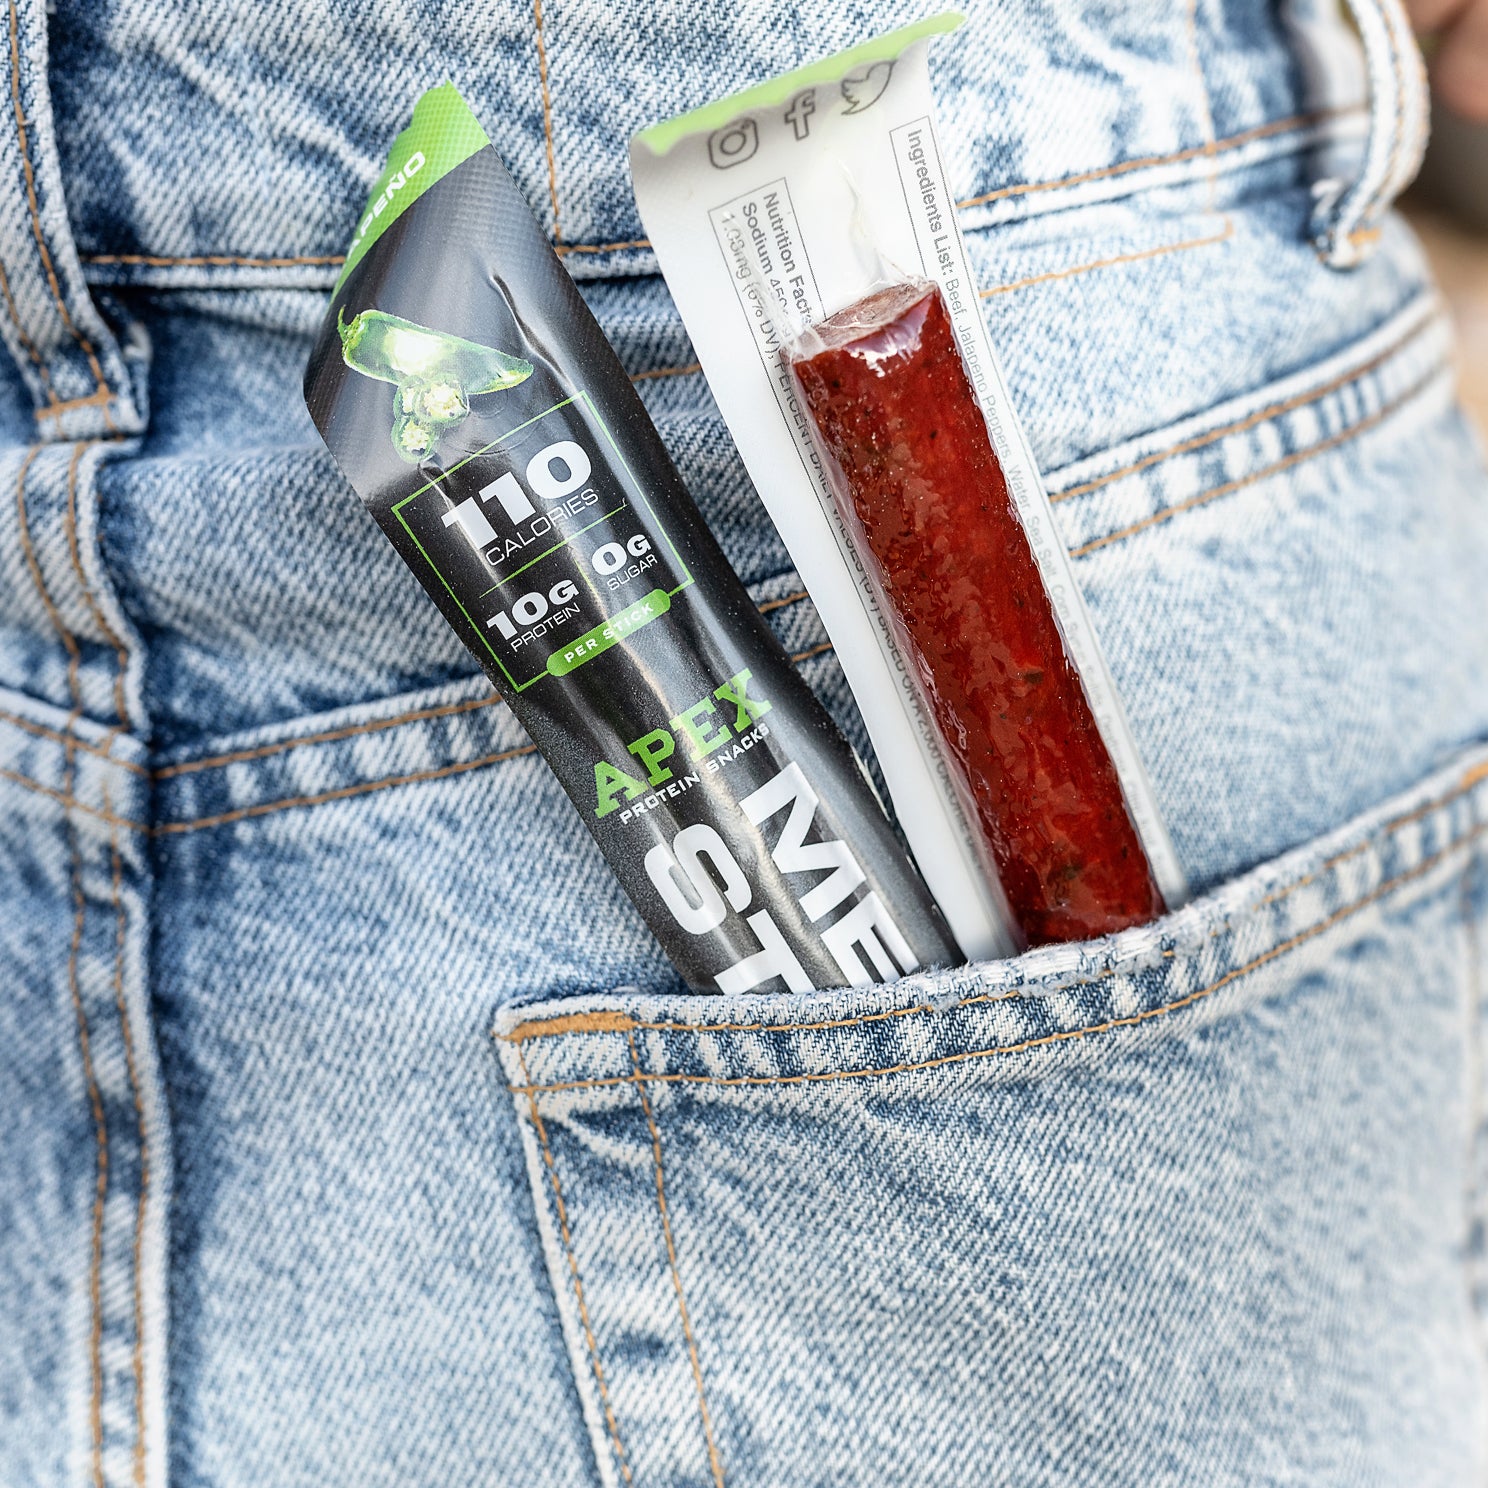 apex protein jalapeno meat sticks on the go